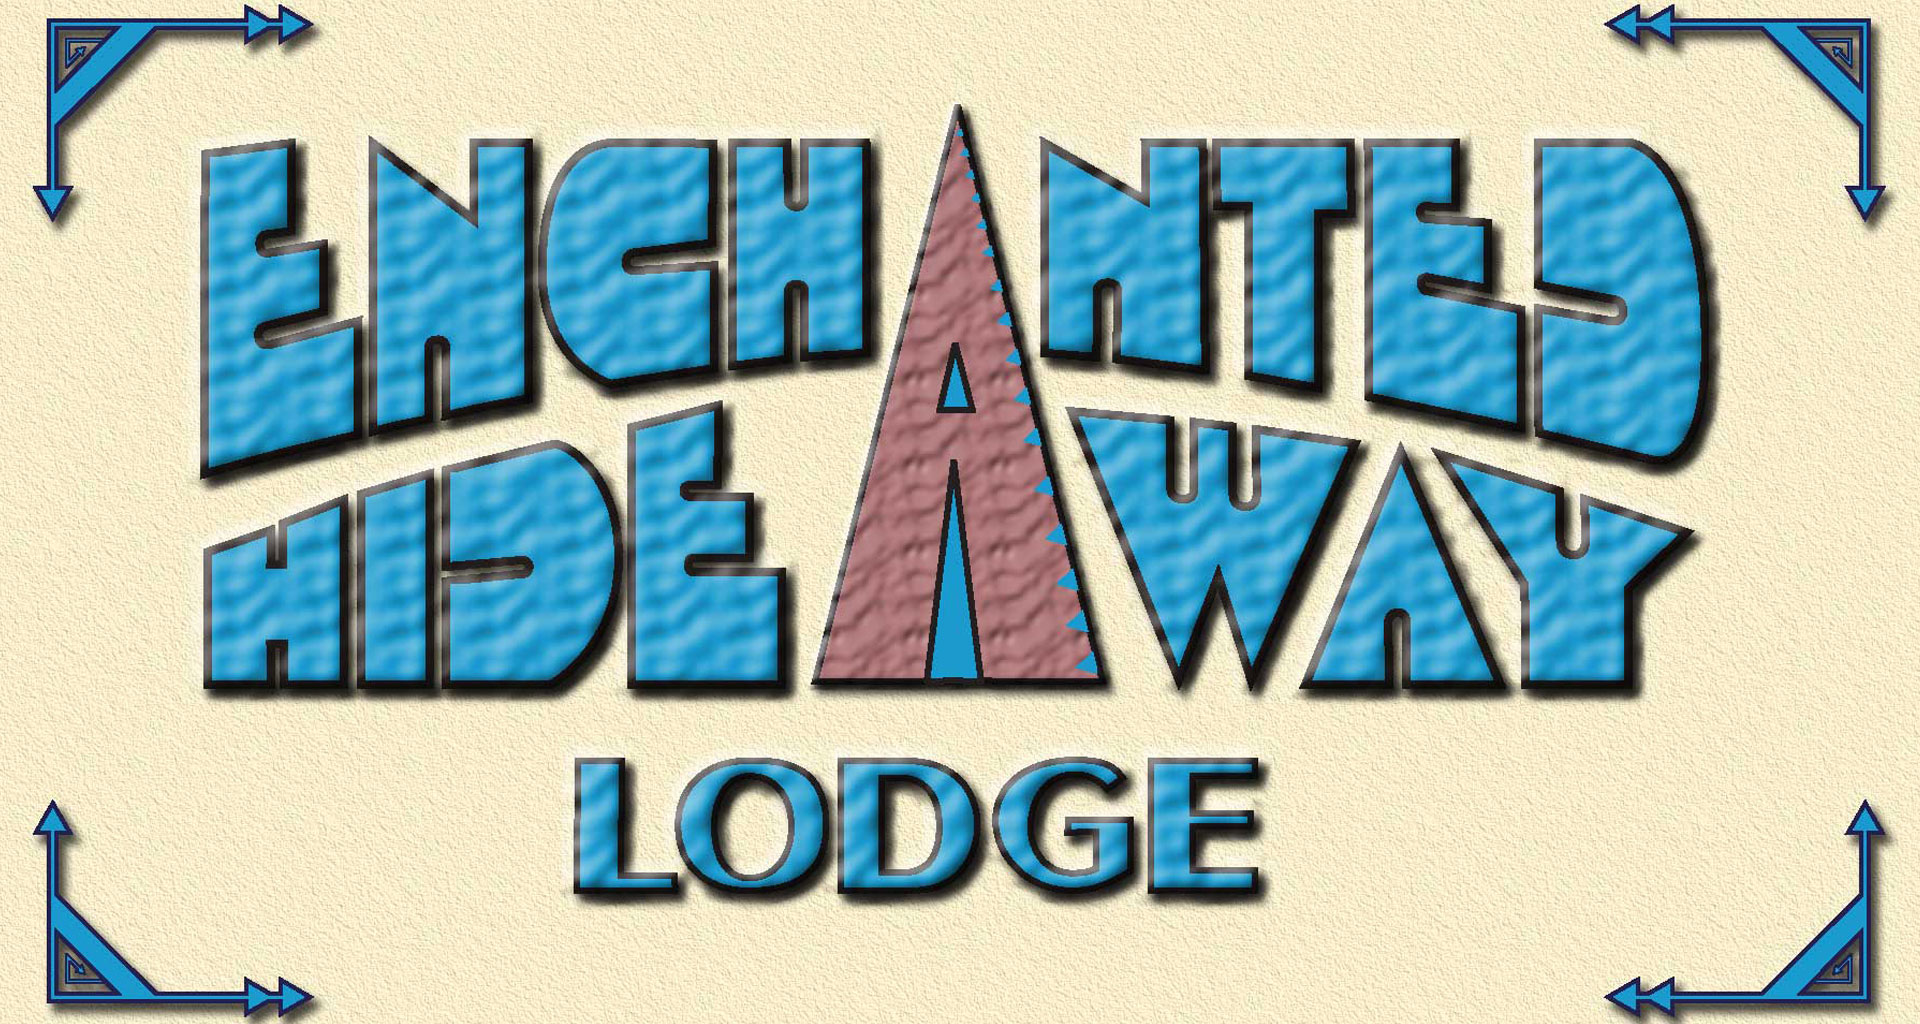 The Enchanted Hideaway Lodge